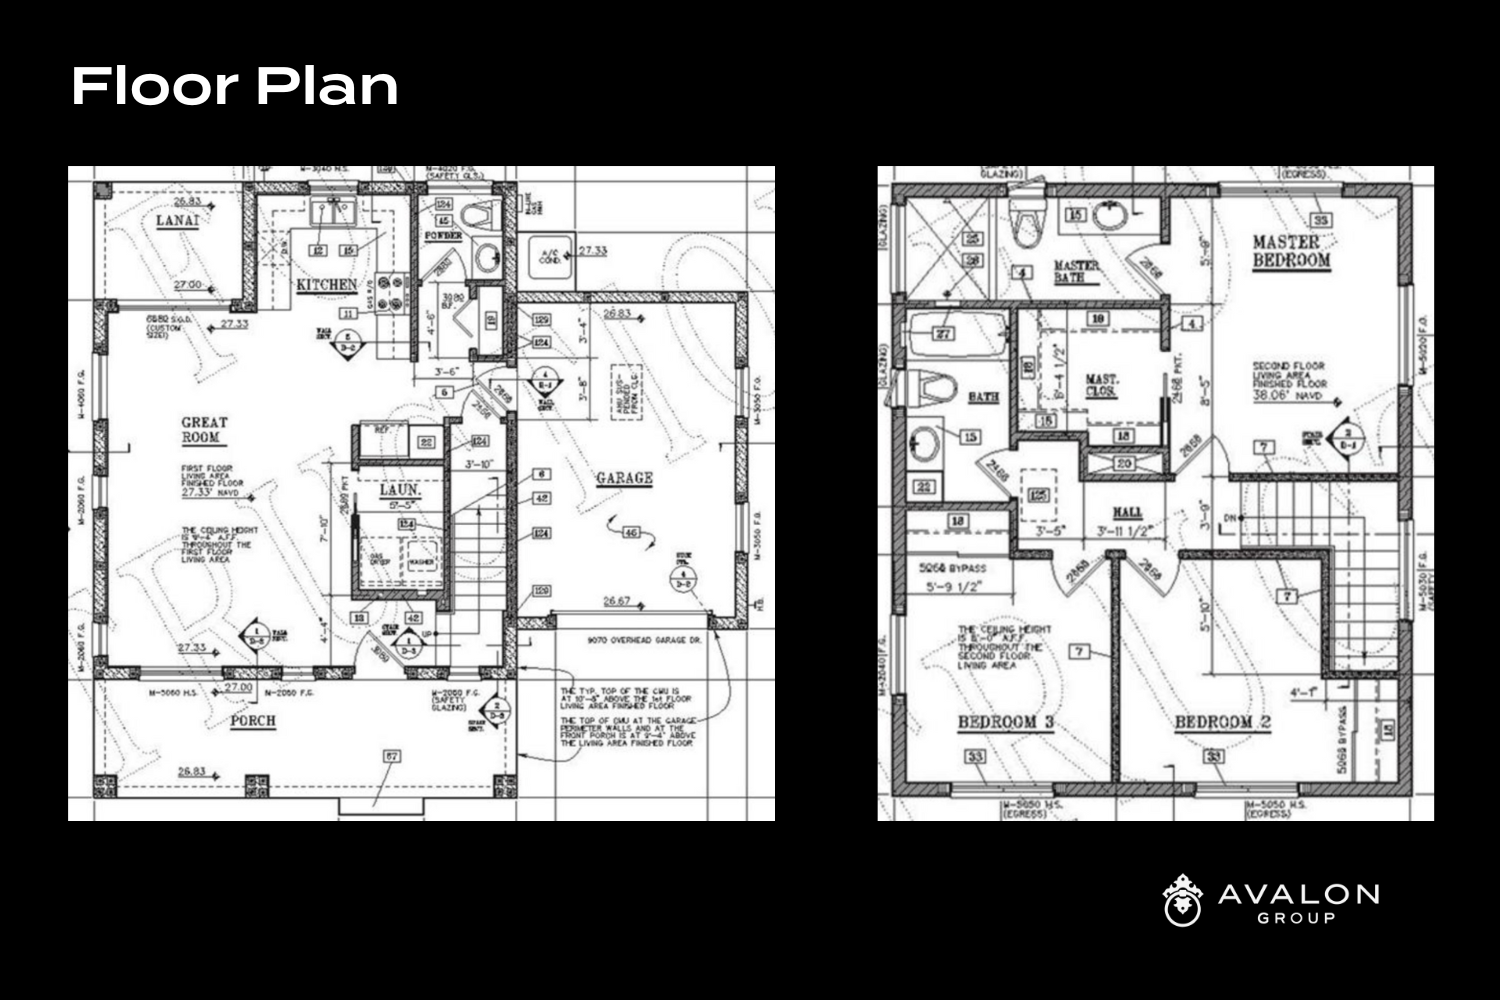 New Kasper Modern Home Floor Plan blueprints in black and white shows the 1st and 2nd floor of a home.